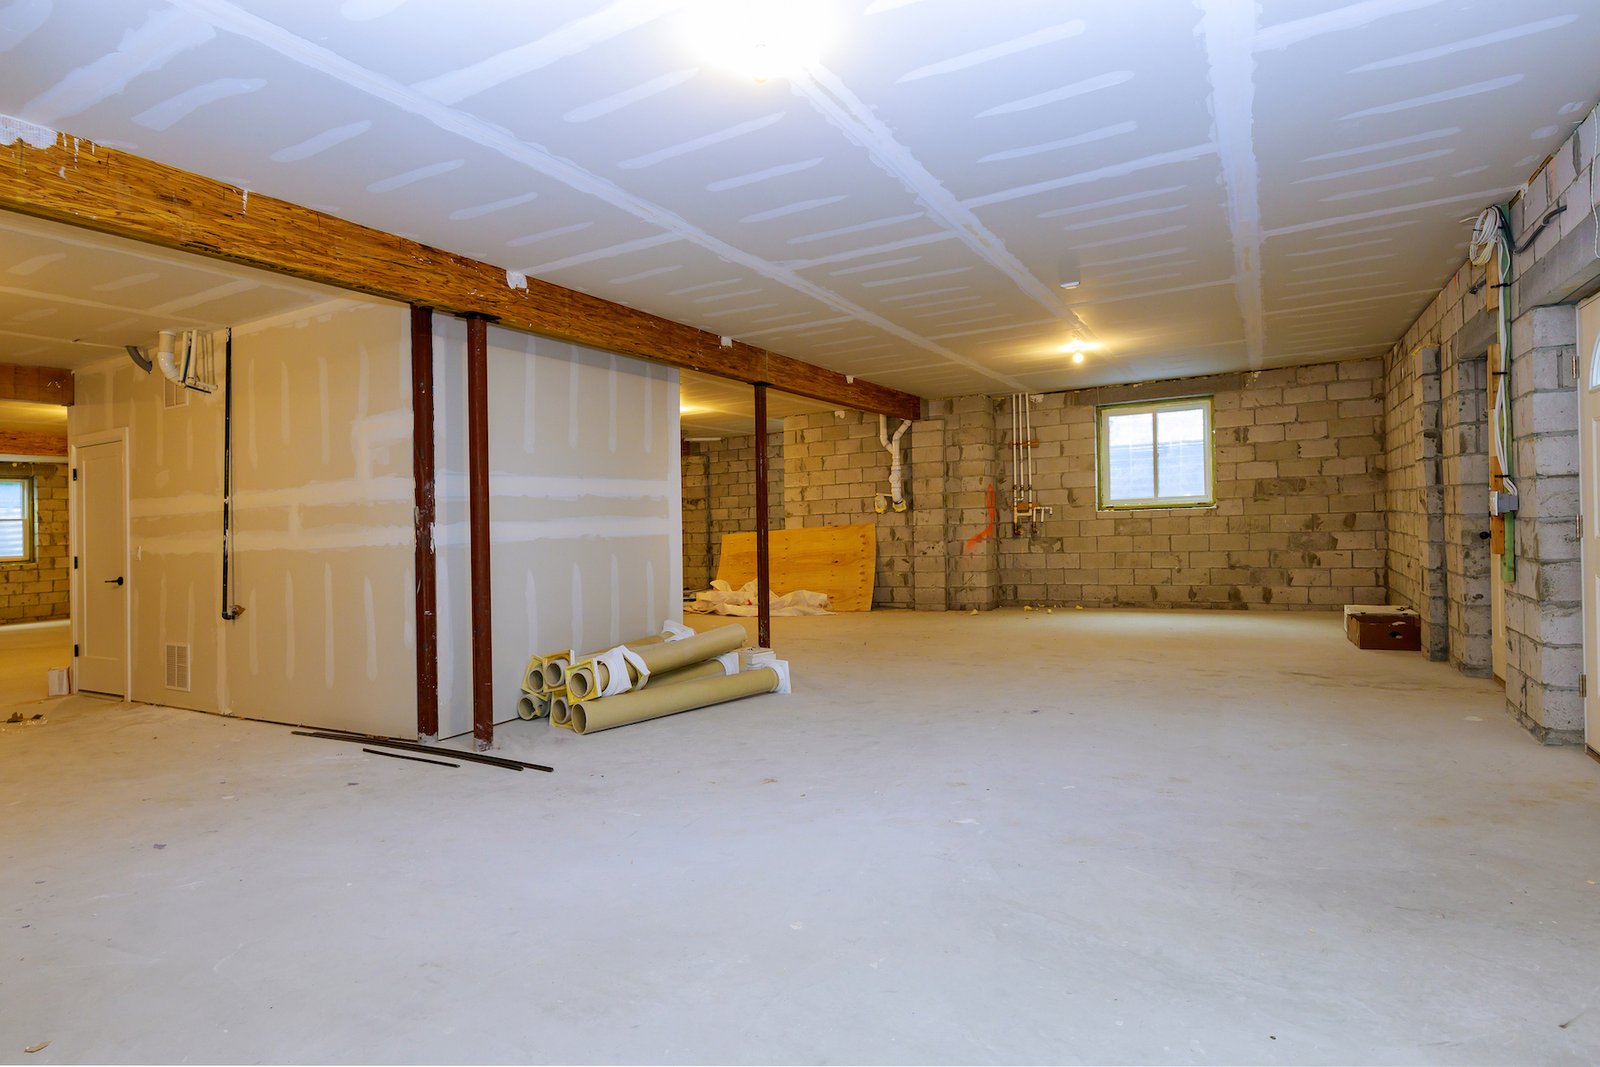  Basement Waterproofing: Preventing Moisture Issues and Mold